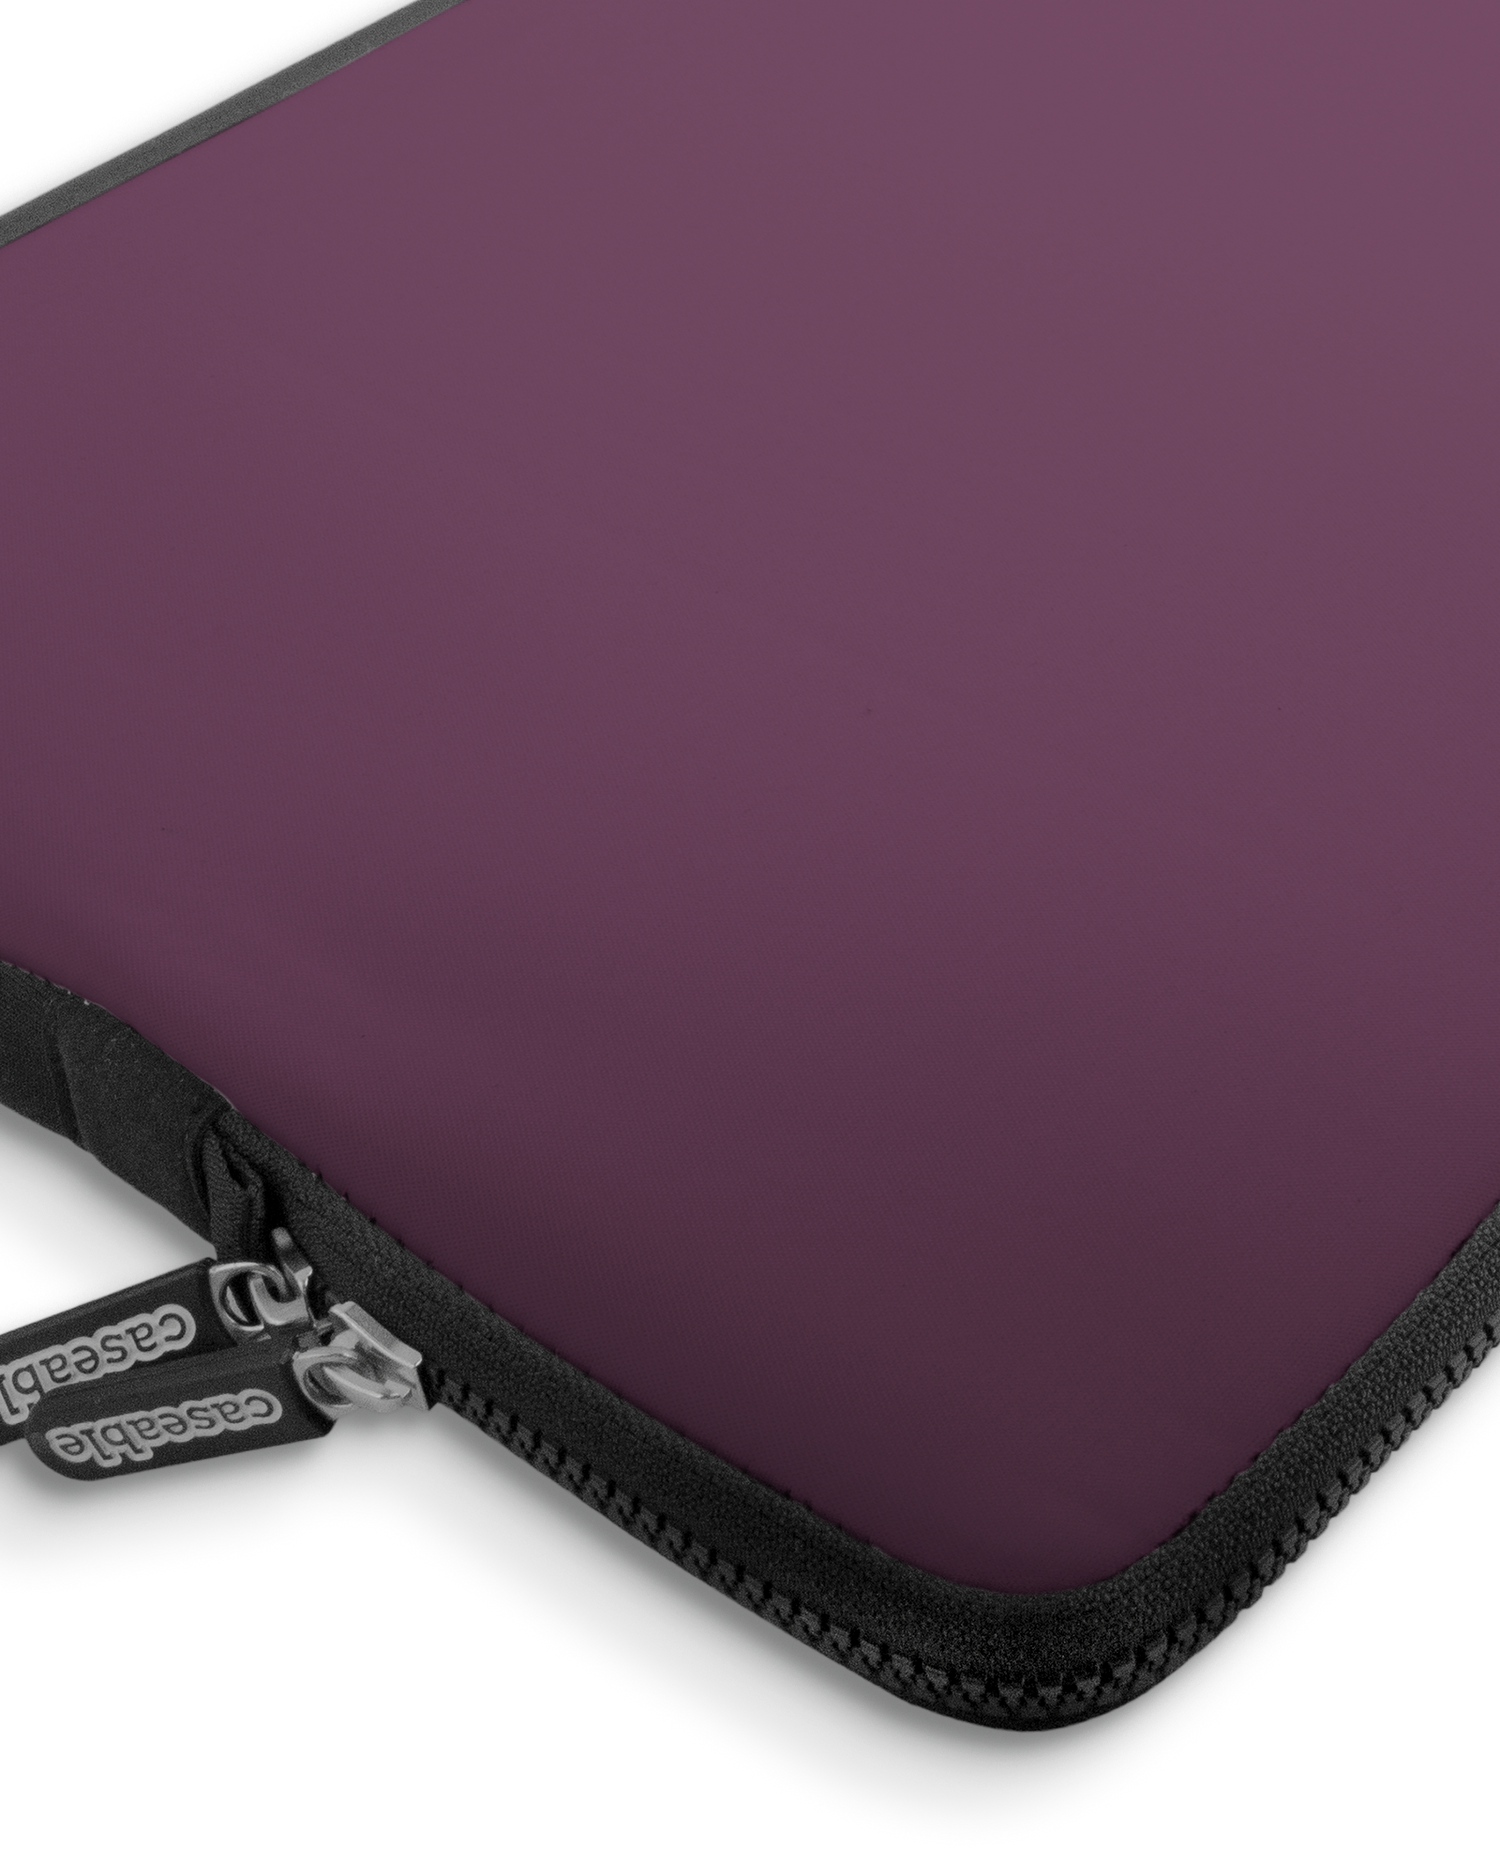 PLUM Premium Laptop Bag 17 inch with device inside